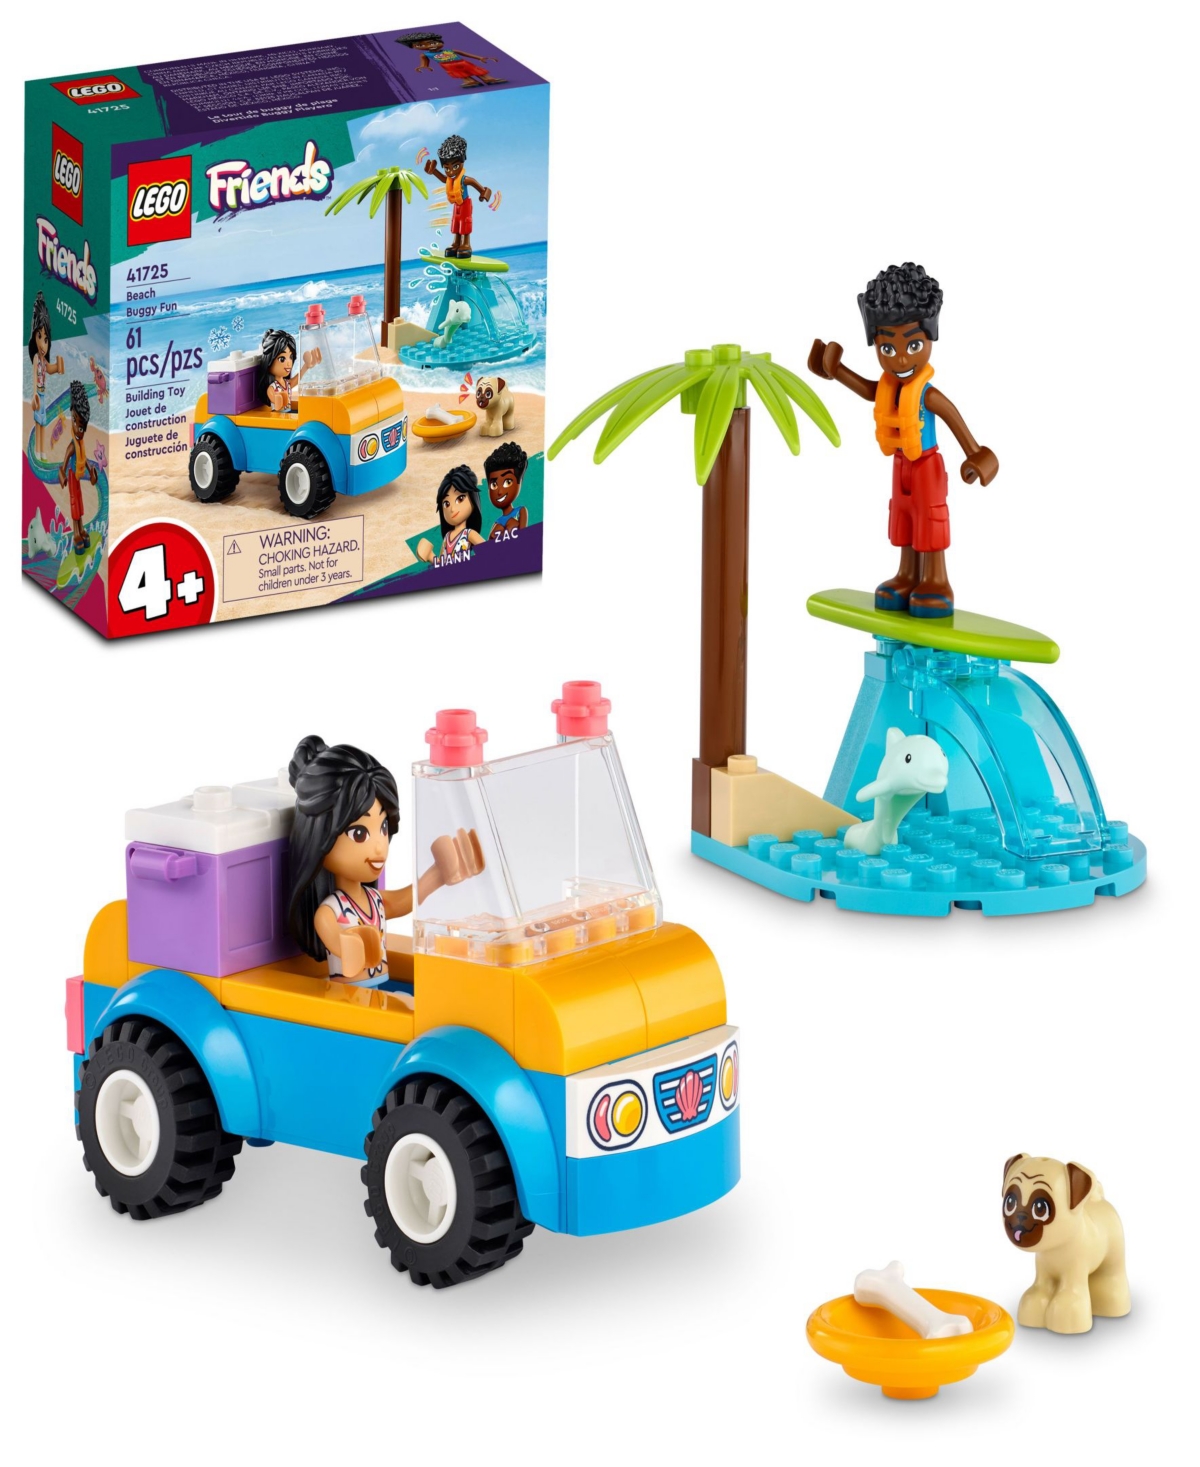 Lego Kids' Friends Beach Buggy Fun Toddler Car Building Toy 41725 In Multicolor